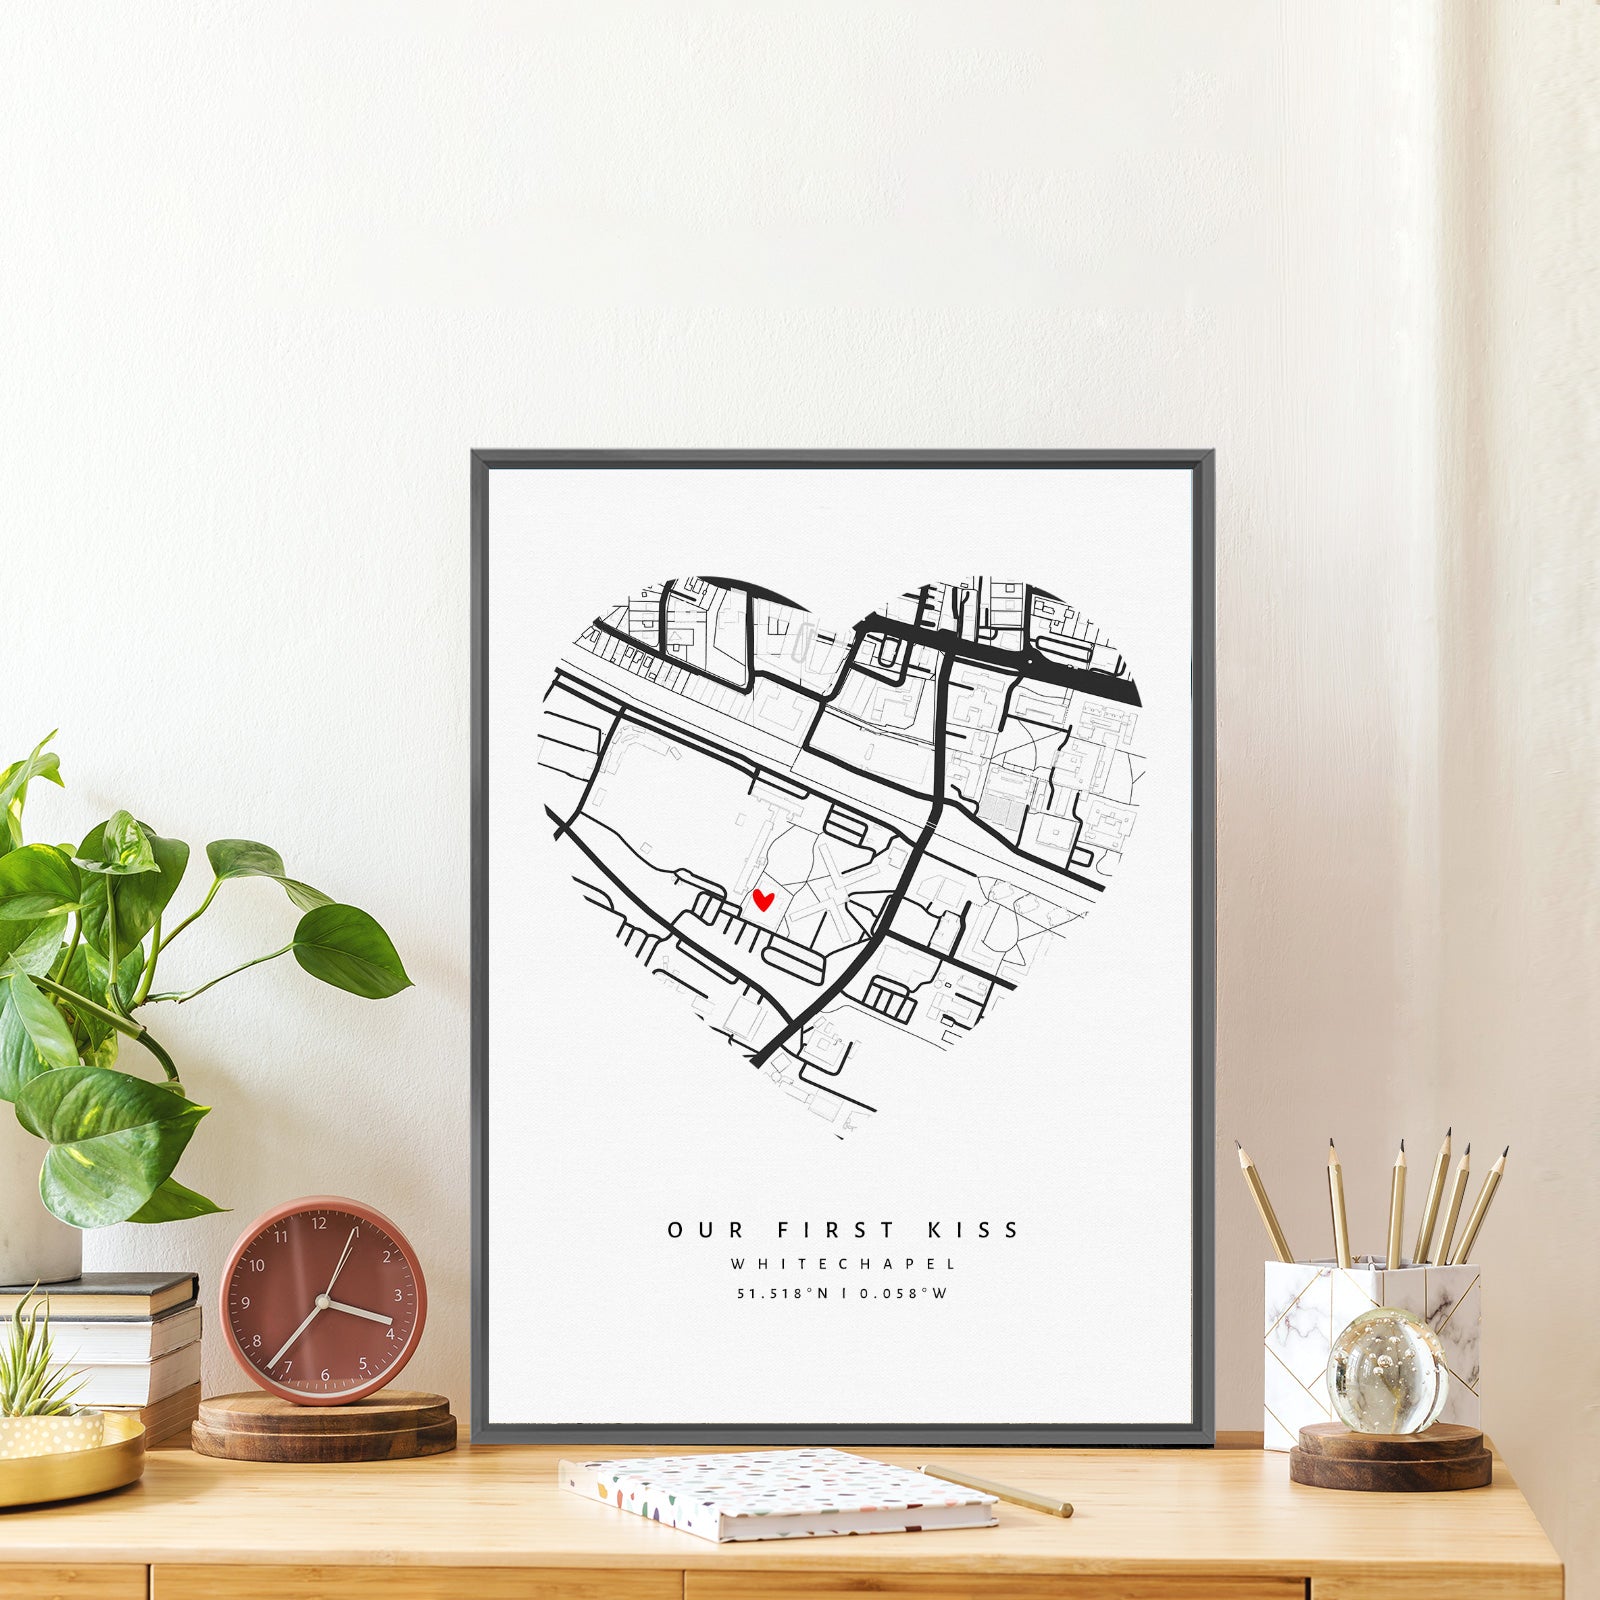 Where It All Began, Where We Met, Our First Date Map, Personalized For Him Her, Couple Wall Art, One Year Anniversary For Boyfriend Girlfriend Wife Husband